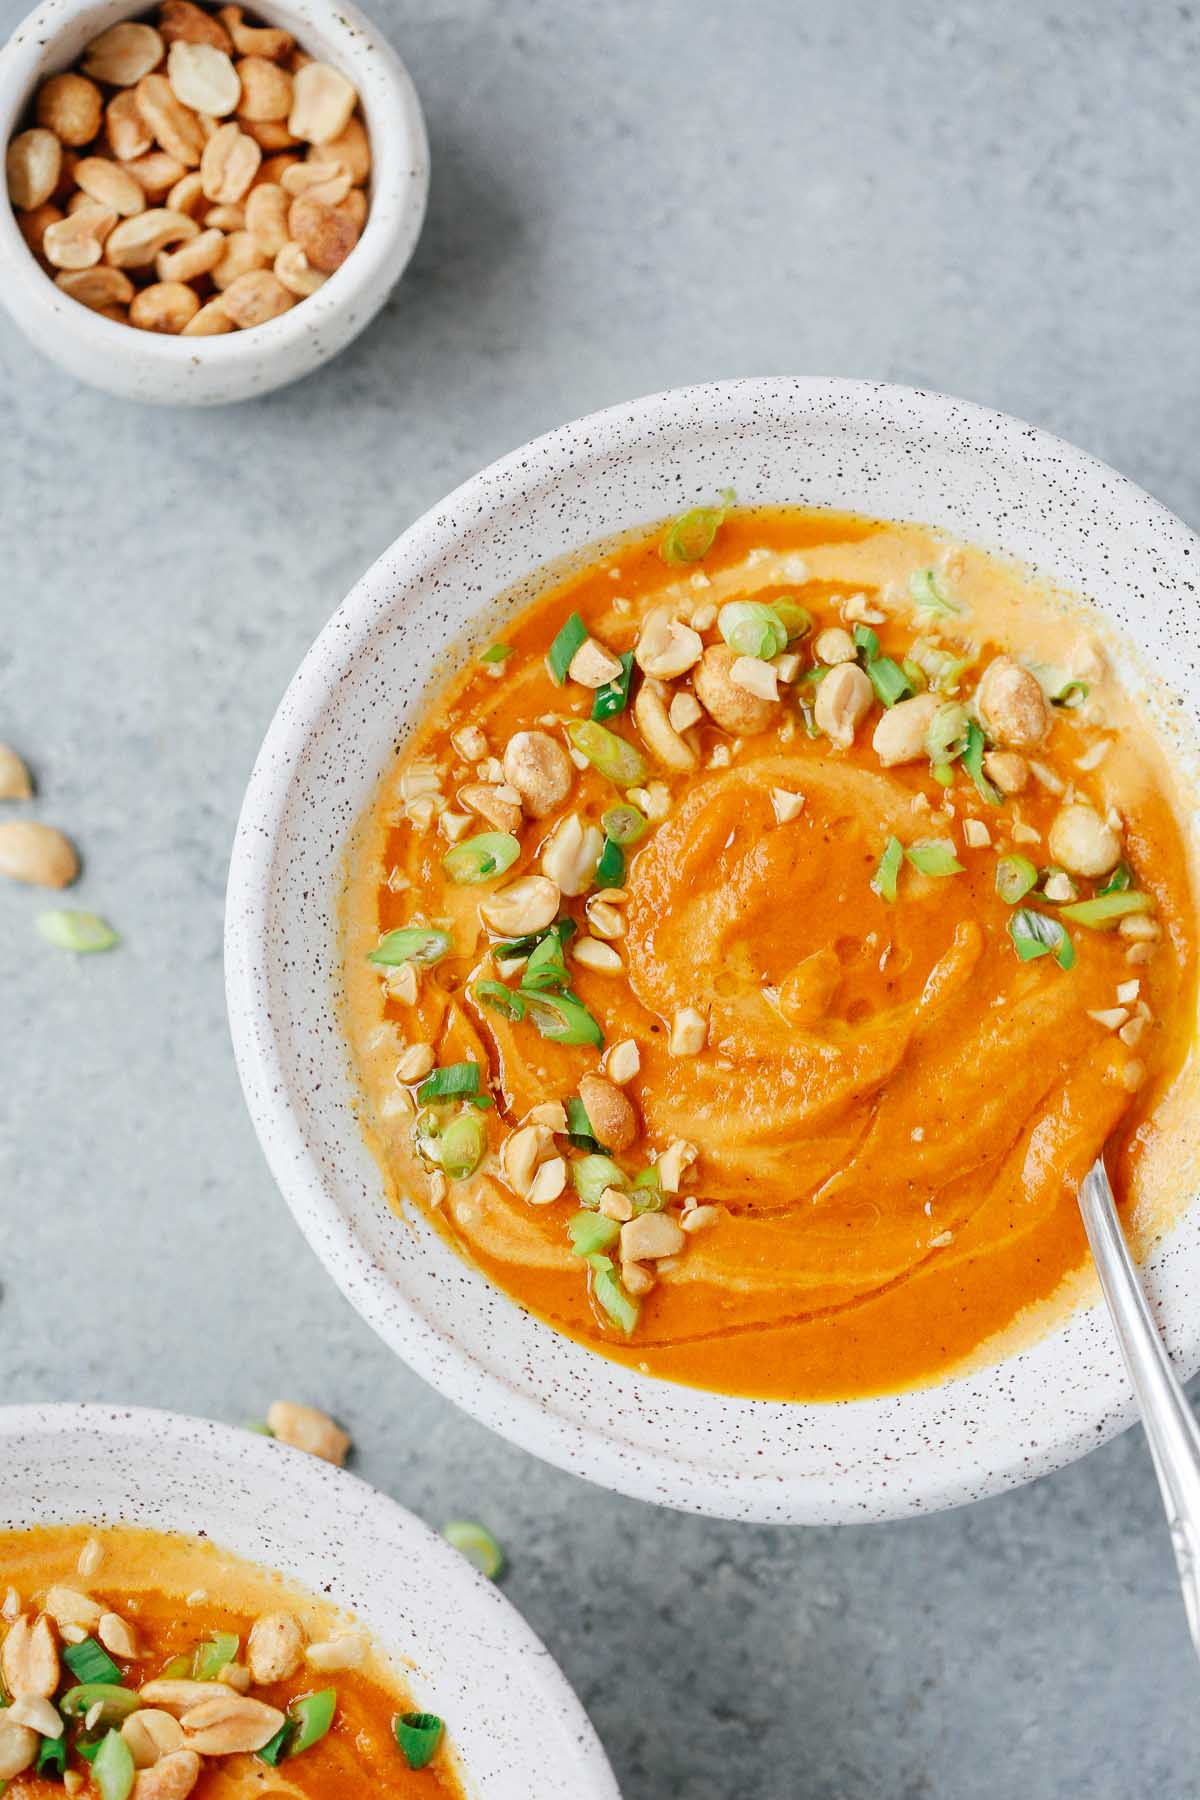 Overhead view of a bowl of spicy carrot soup with a spoon inside.